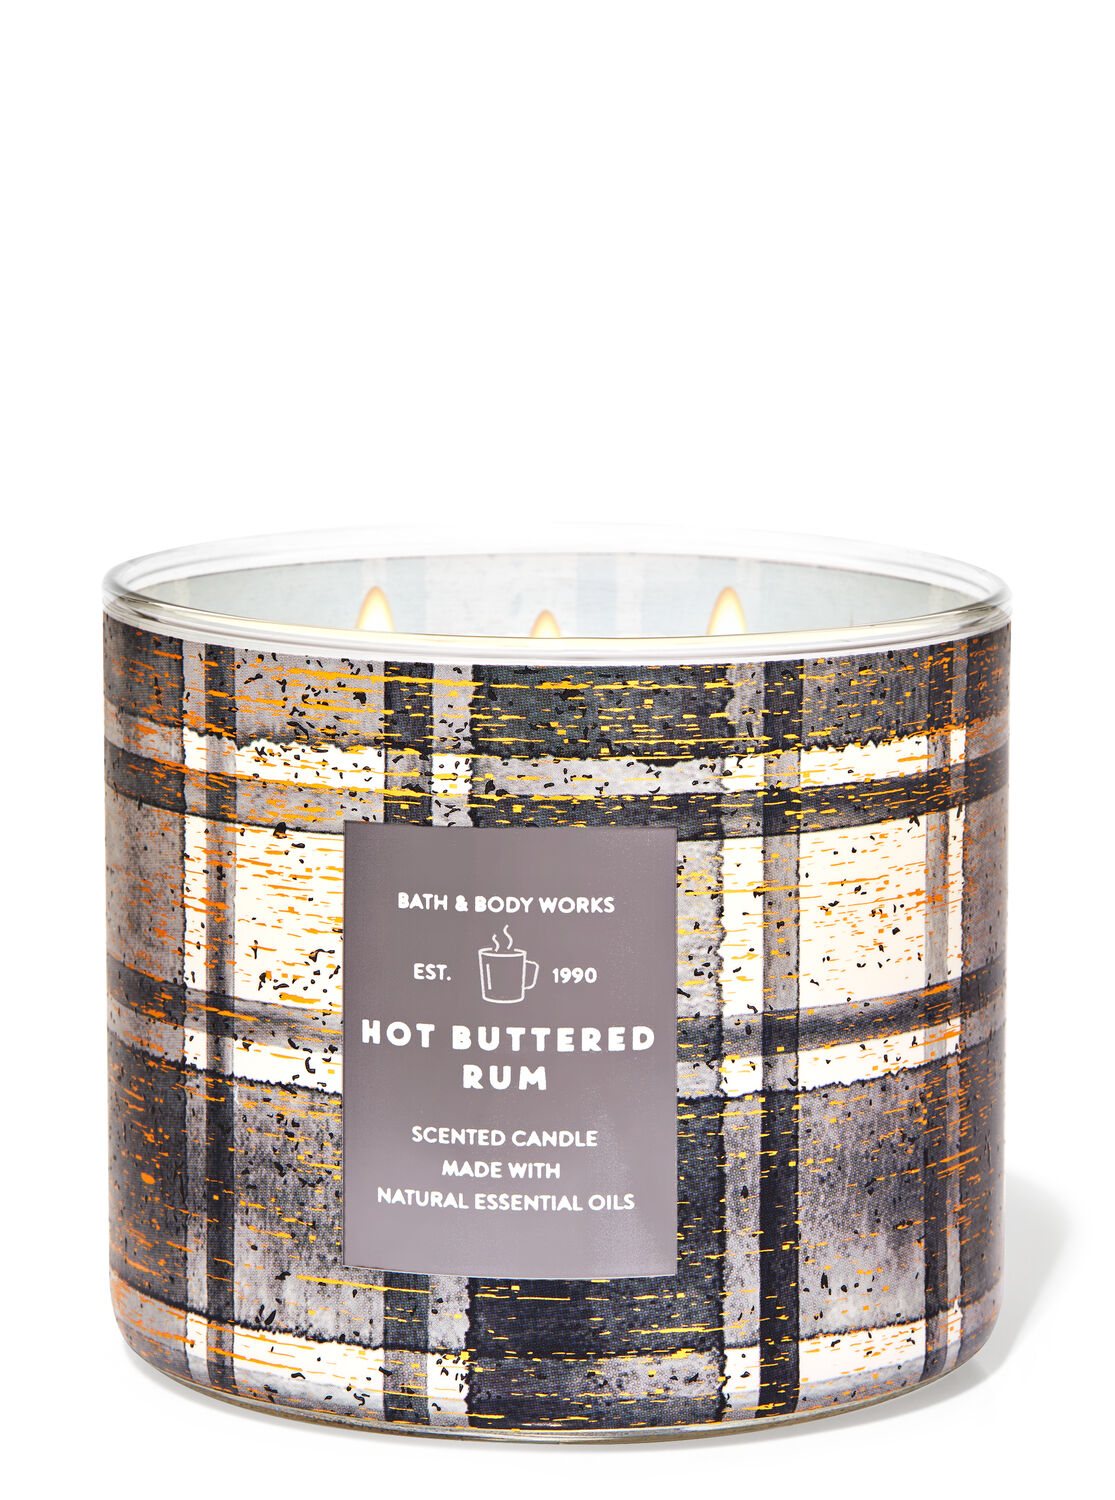 Bath & Body Works HOT BUTTERED RUM Large 3-Wick Candle VANILLA CARAMEL BOURBON 